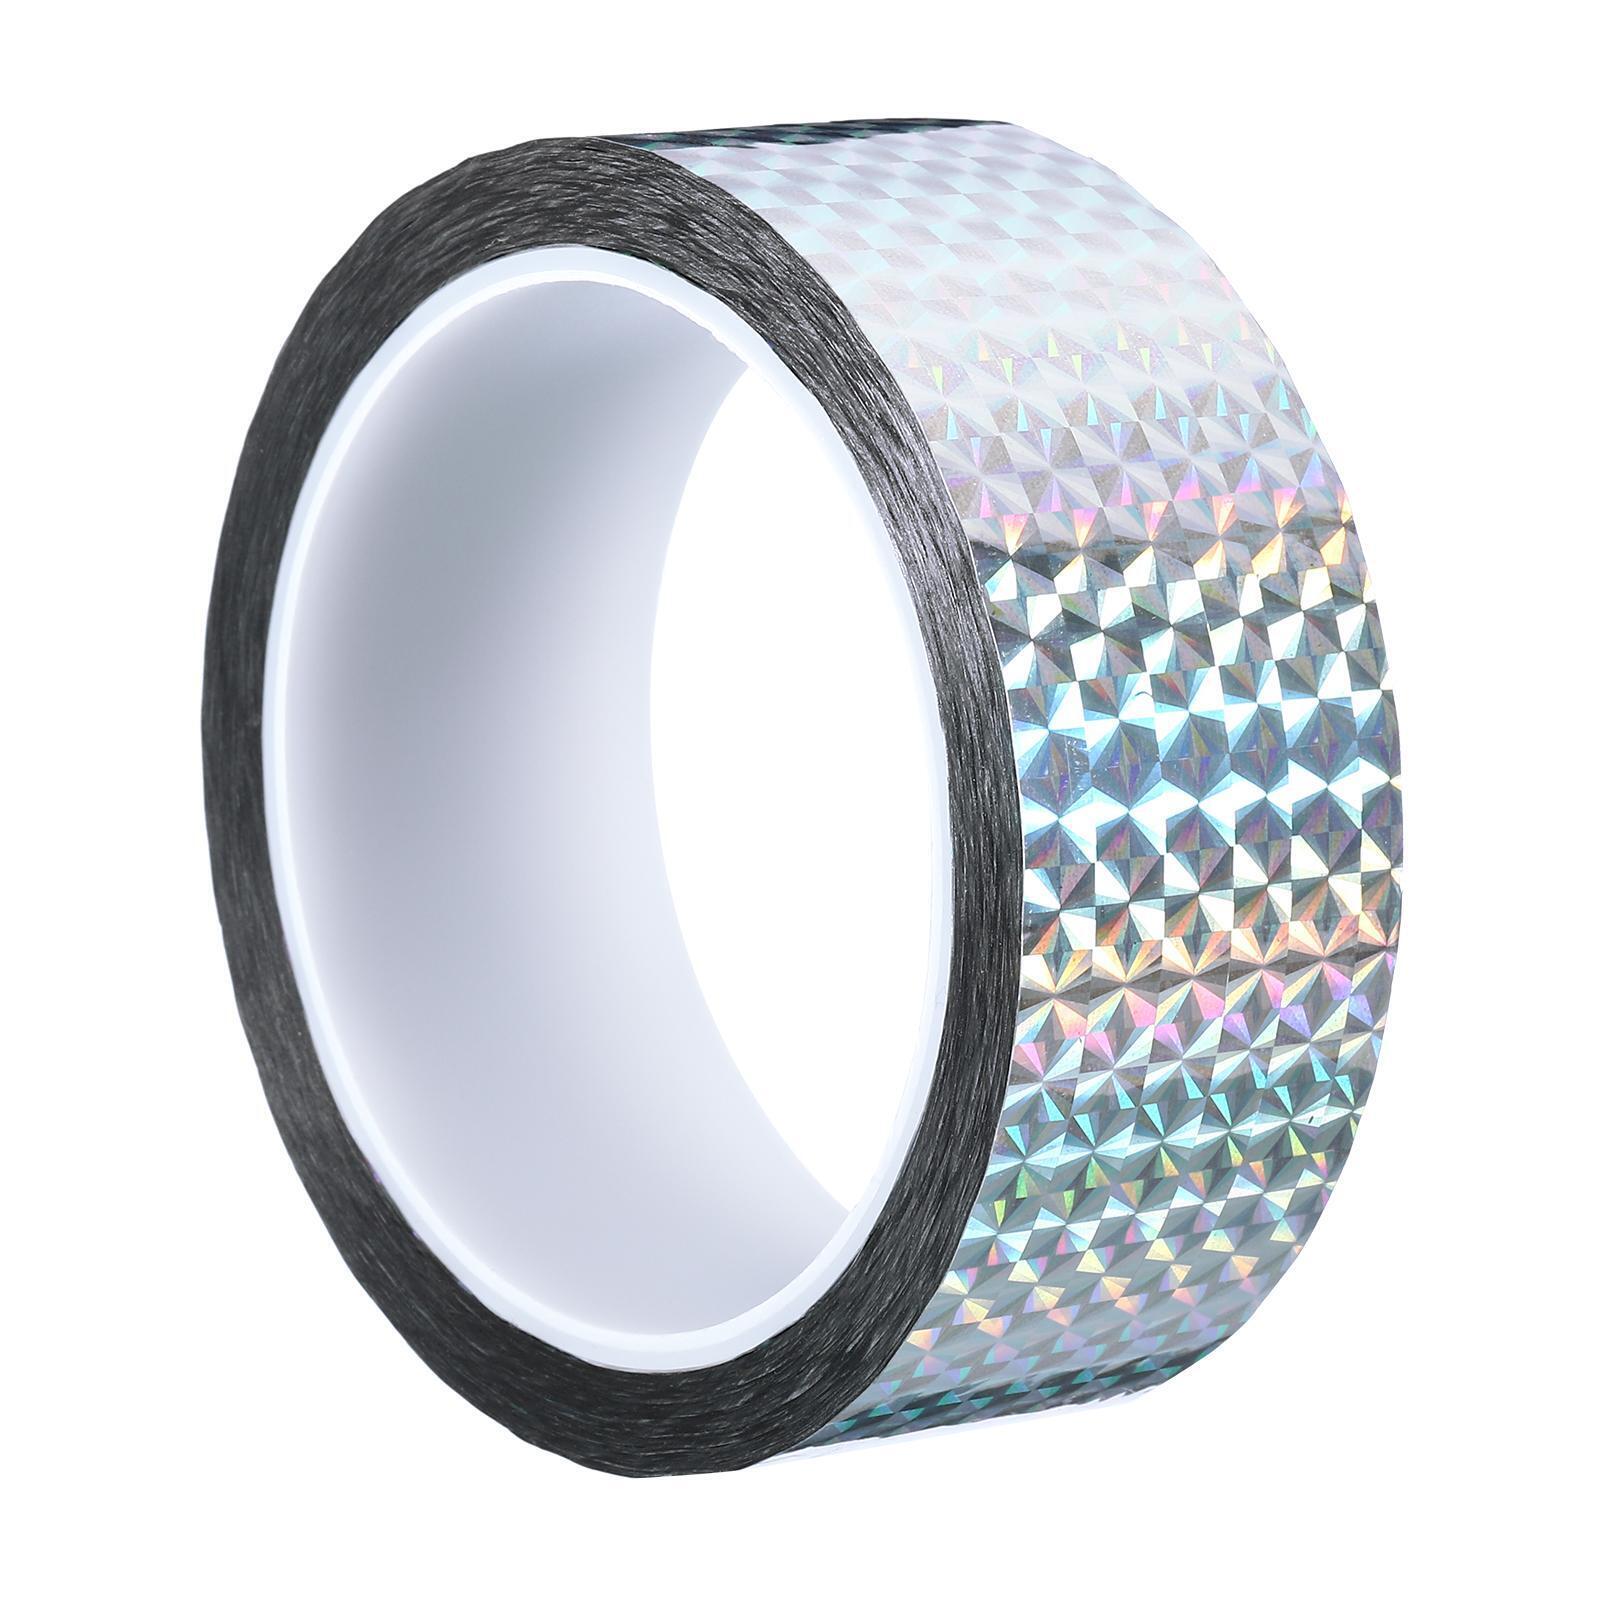 Prism Tape Holographic Reflective Adhesive Craft Decoration Silver 35mmx50m